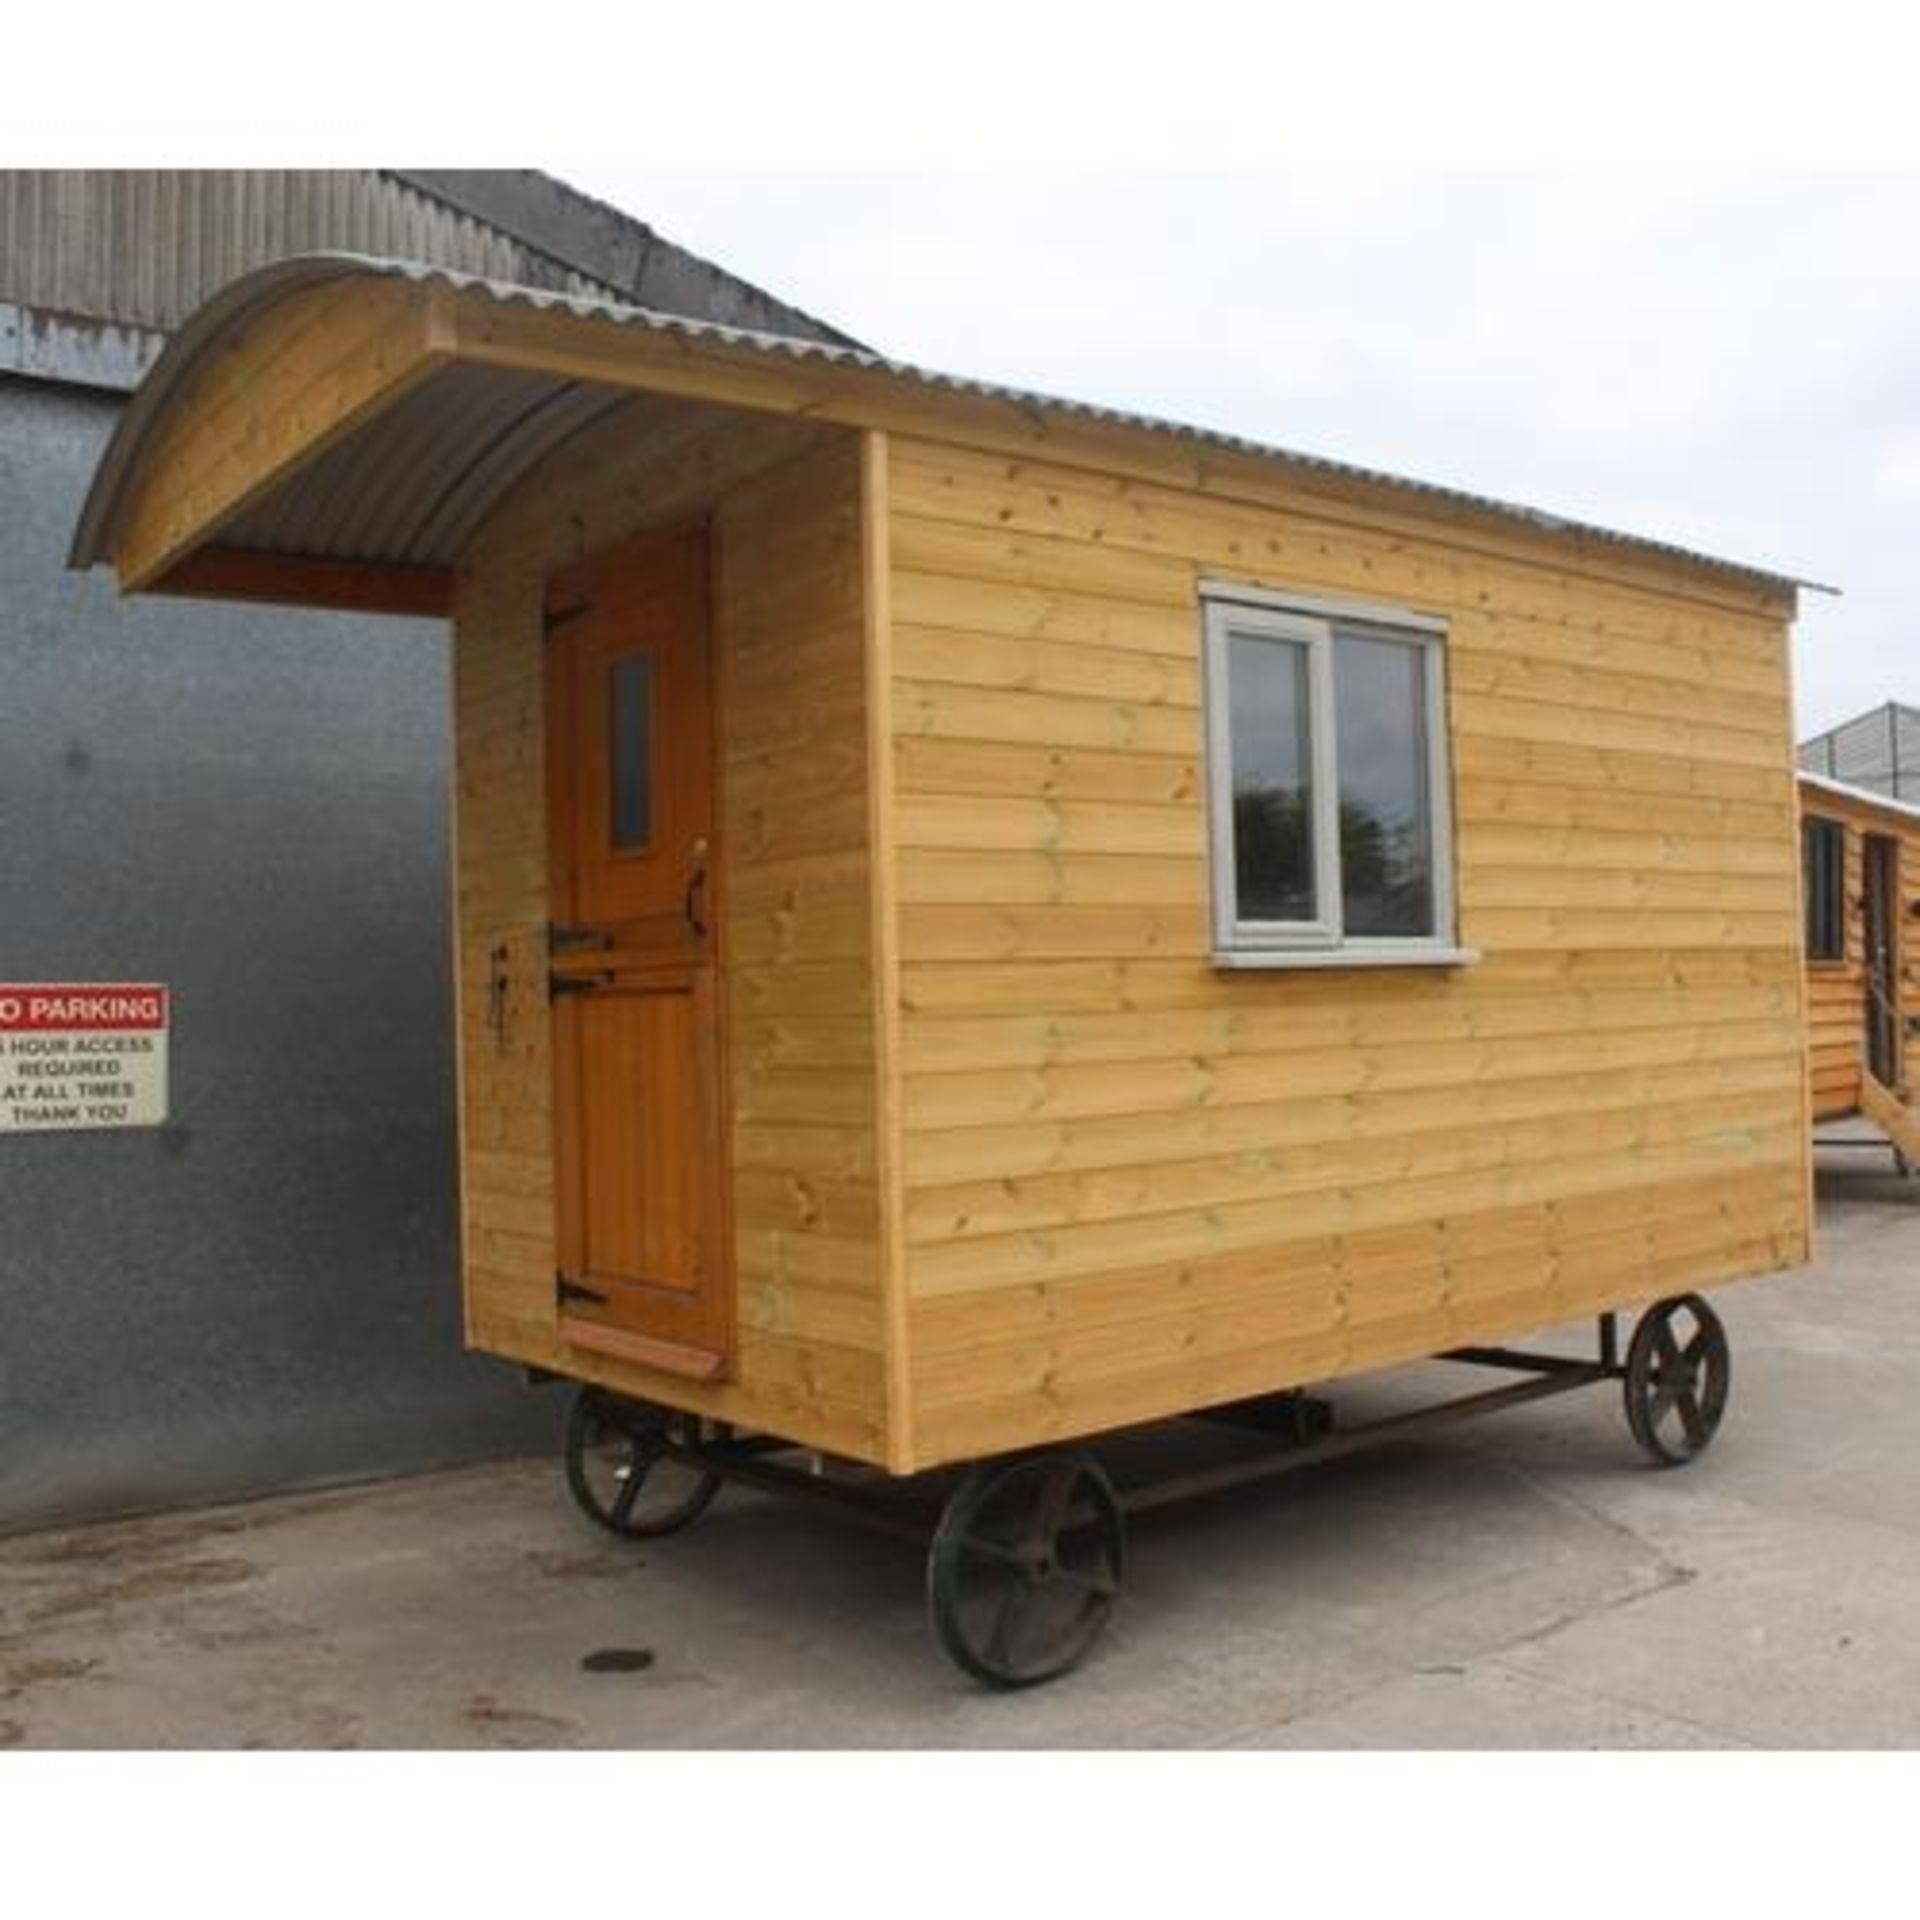 SHEPHERDS HUT 12' X 7' FULLY INSULATED WITH LIGHTS, SOCKETS, DOUBLE GLAZED WINDOW, TREATED